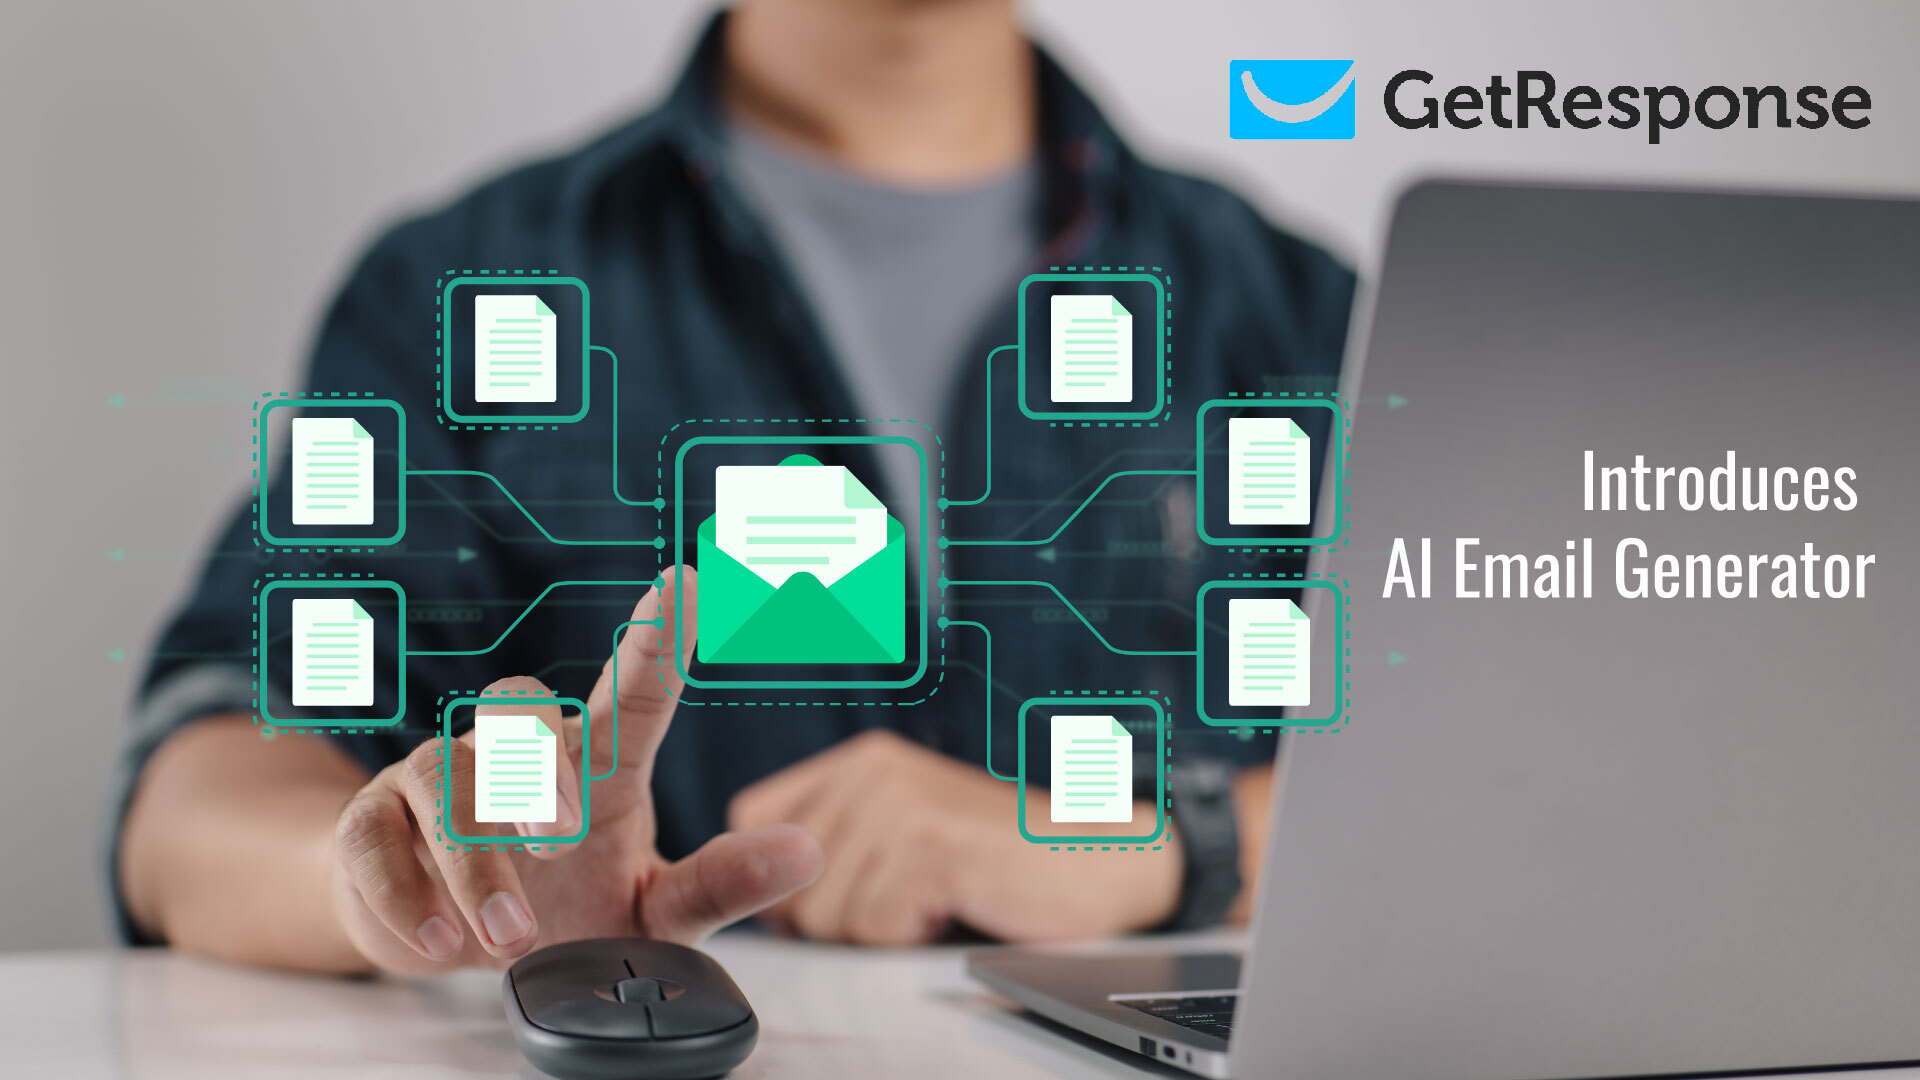 GetResponse Introduces AI Email Generator Powered by OpenAI's GPT Technology to Help Marketers Maximize Efficiency and Performance